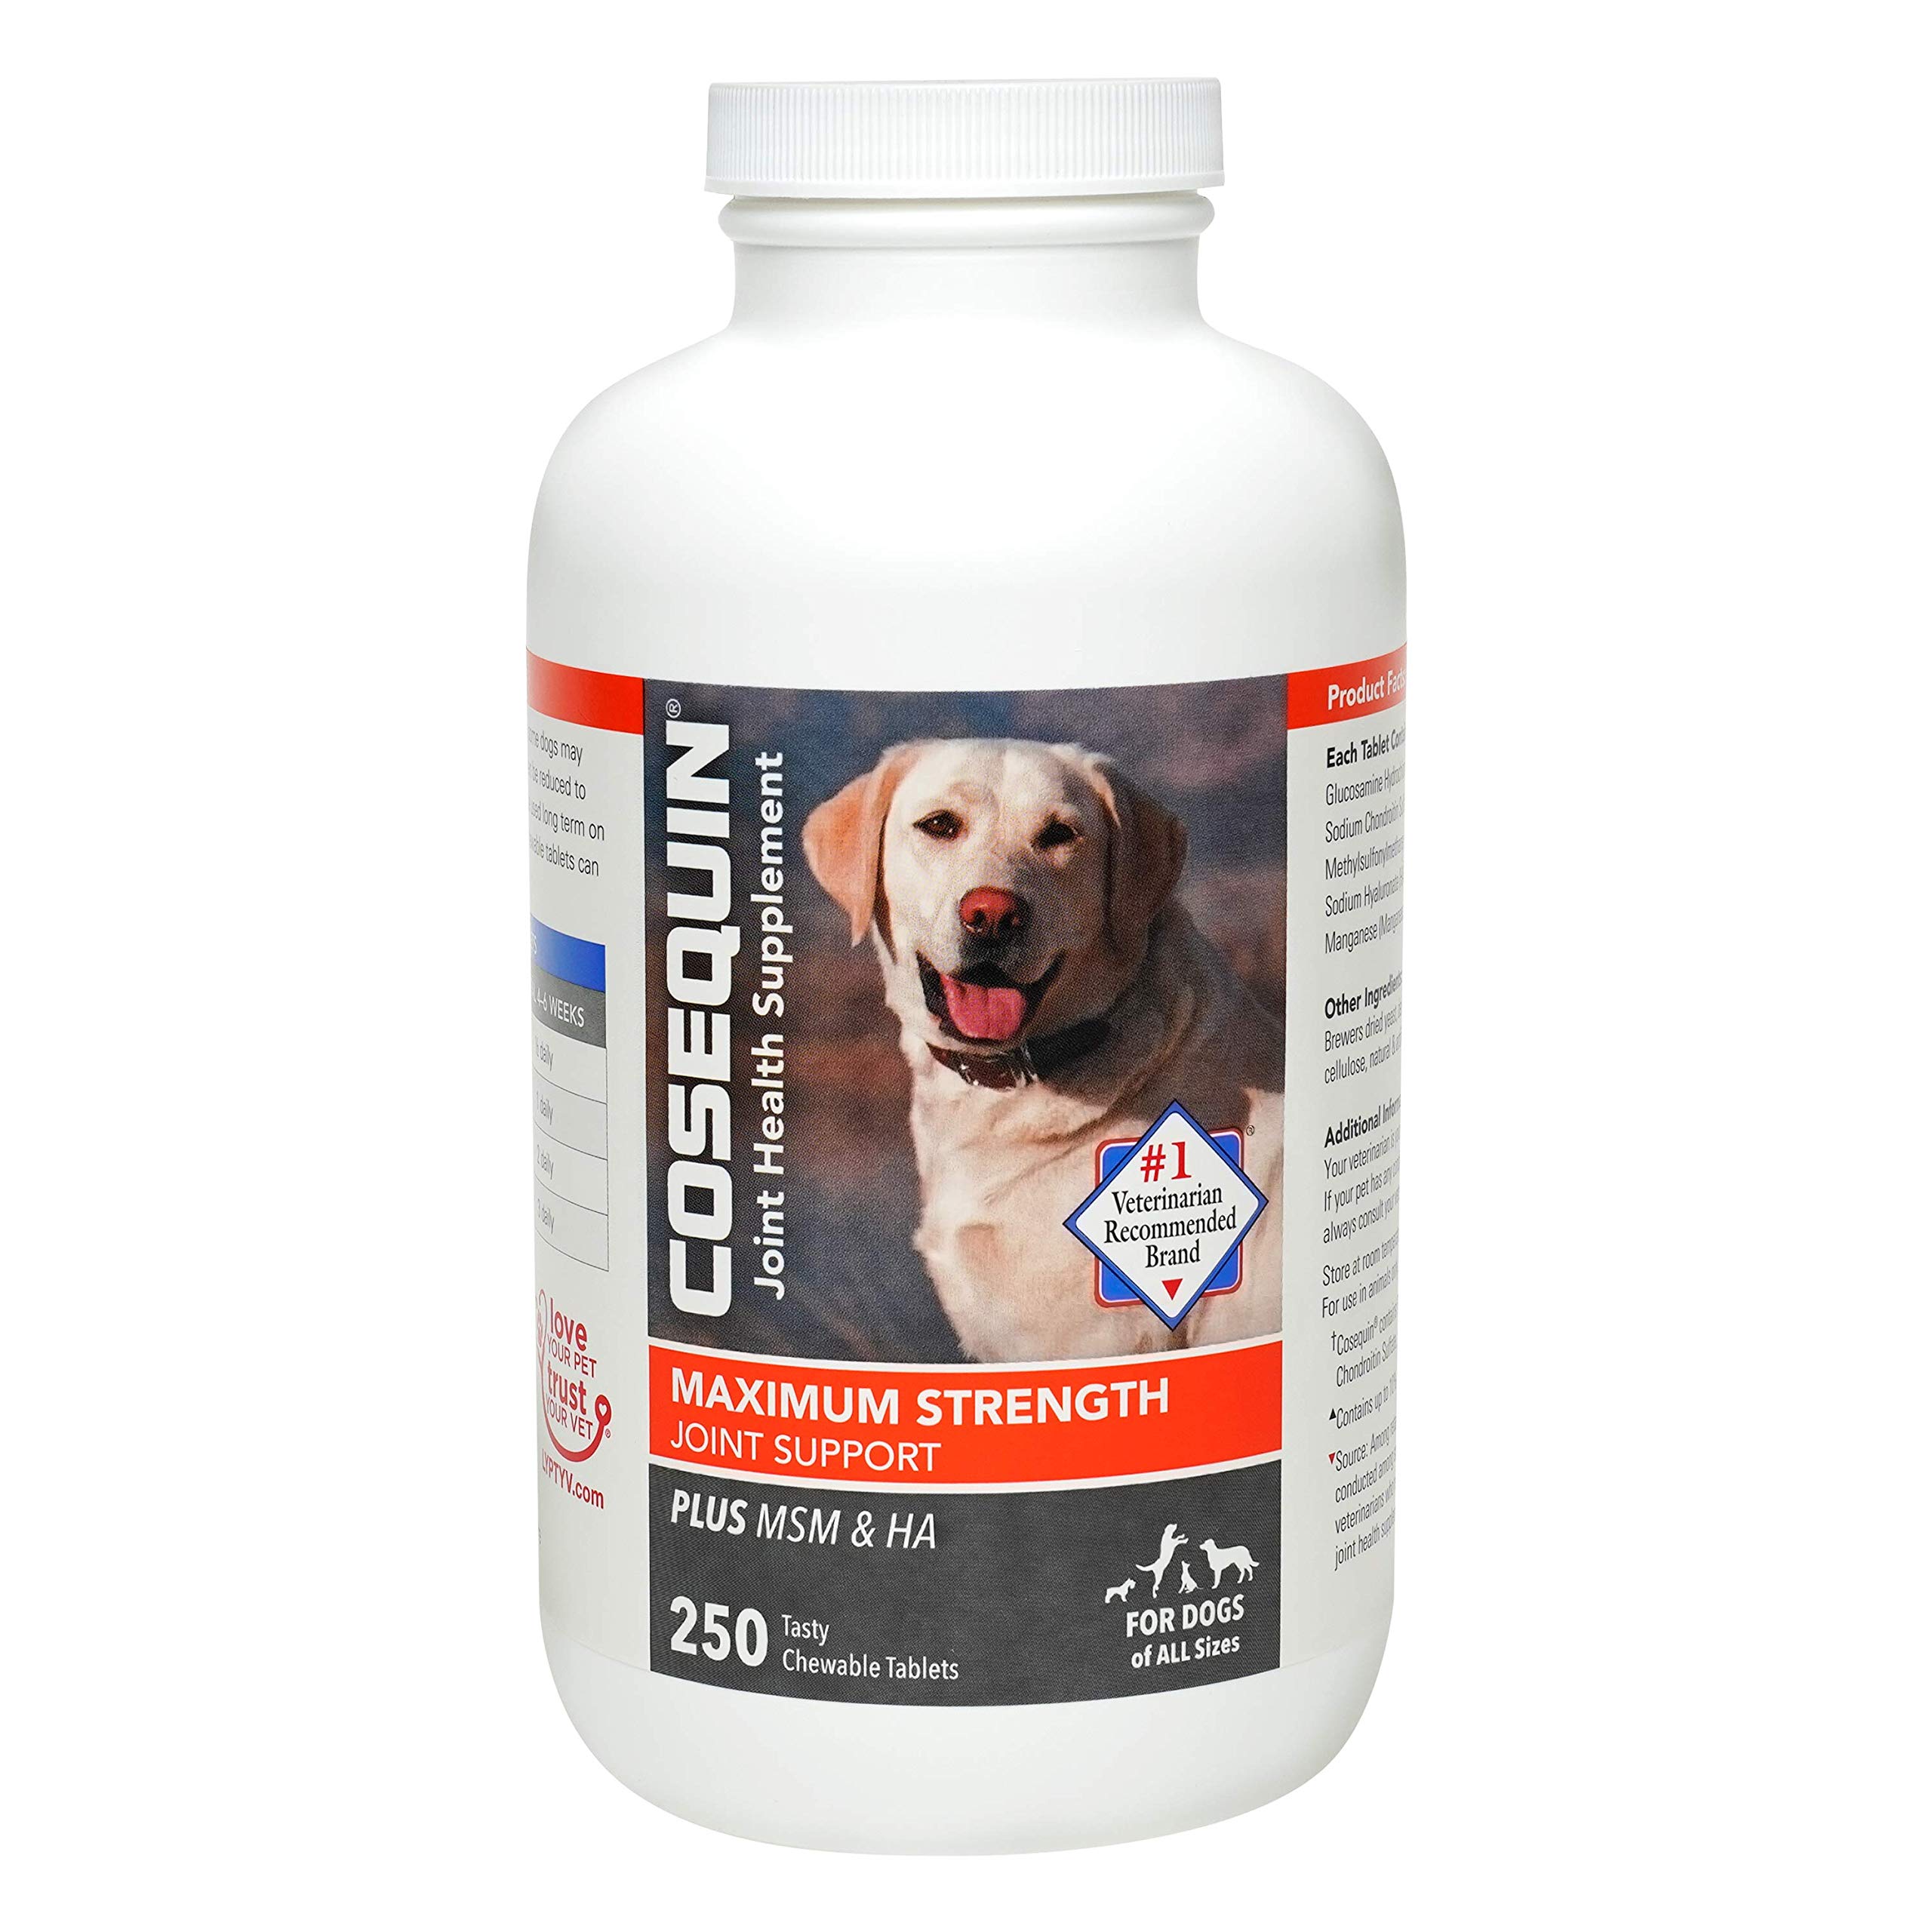 Nutramax Laboratorie Nutramax cosequin Maximum Strength Joint Health Supplement for Dogs - With glucosamine chondroitin MSM and Hyaluronic Acid 250 c